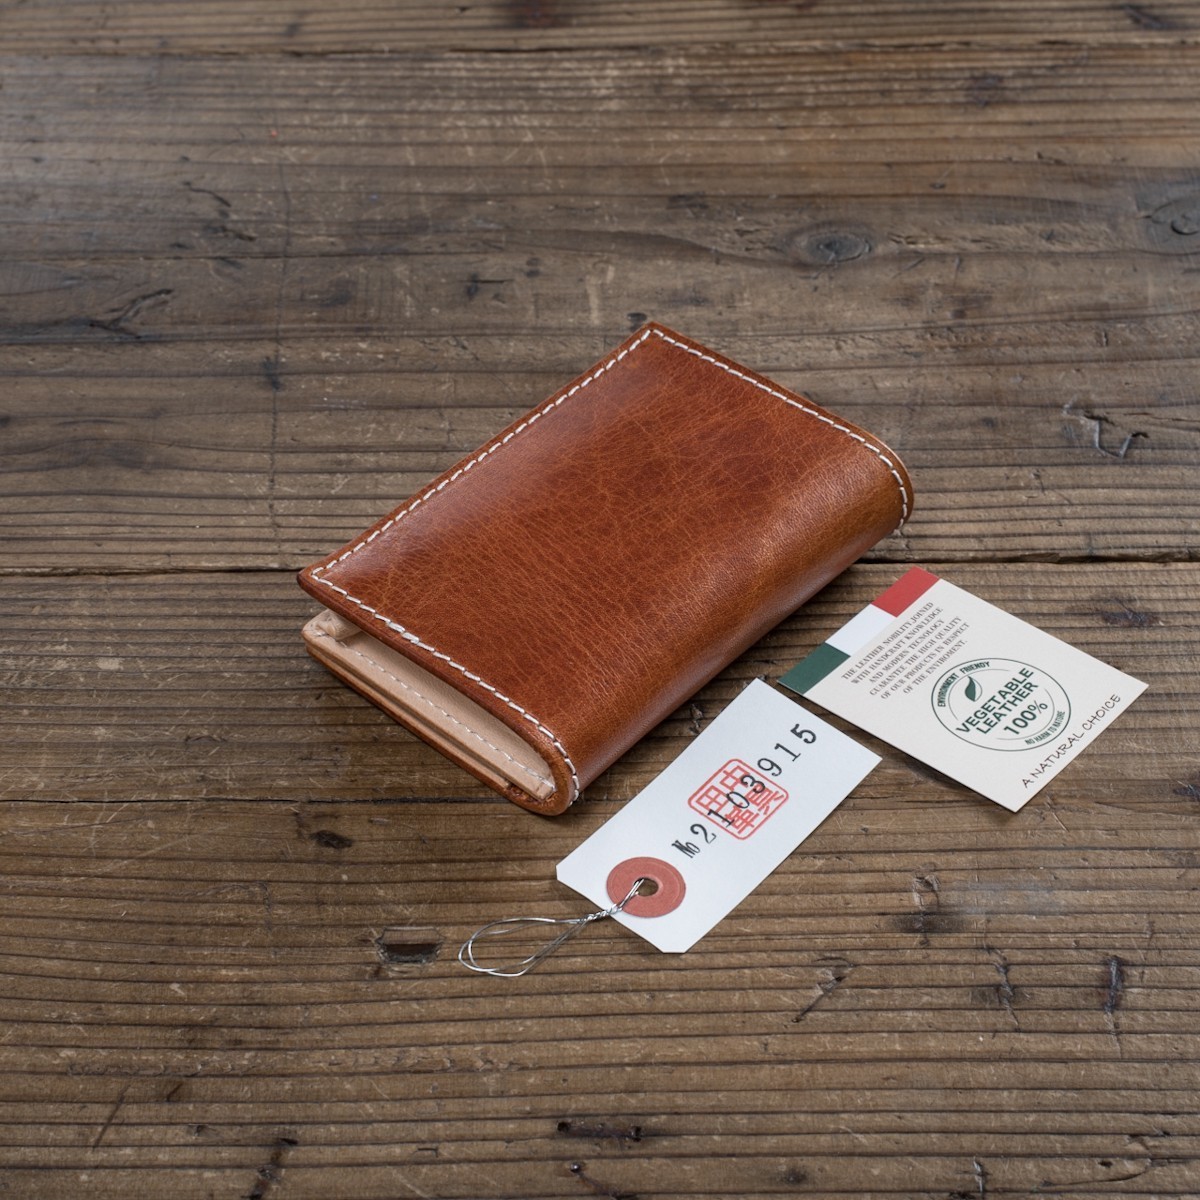  men's card-case card inserting ticket holder cow leather original leather card-case cow leather business new goods unused free shipping 1 jpy Italian leather tea Brown 